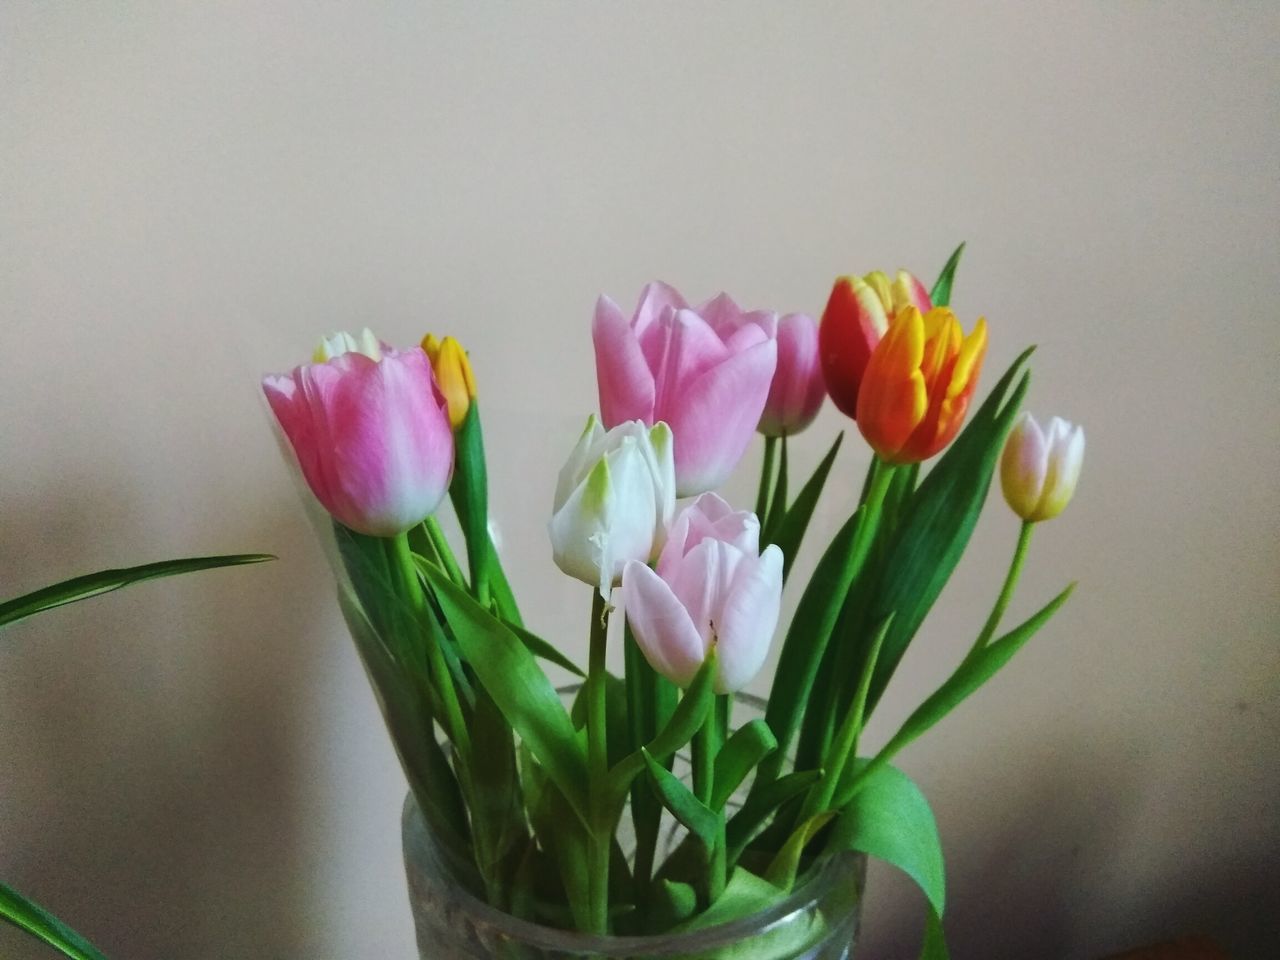 flower, fragility, freshness, petal, nature, beauty in nature, flower head, tulip, vase, no people, close-up, plant, growth, indoors, leaf, blooming, day